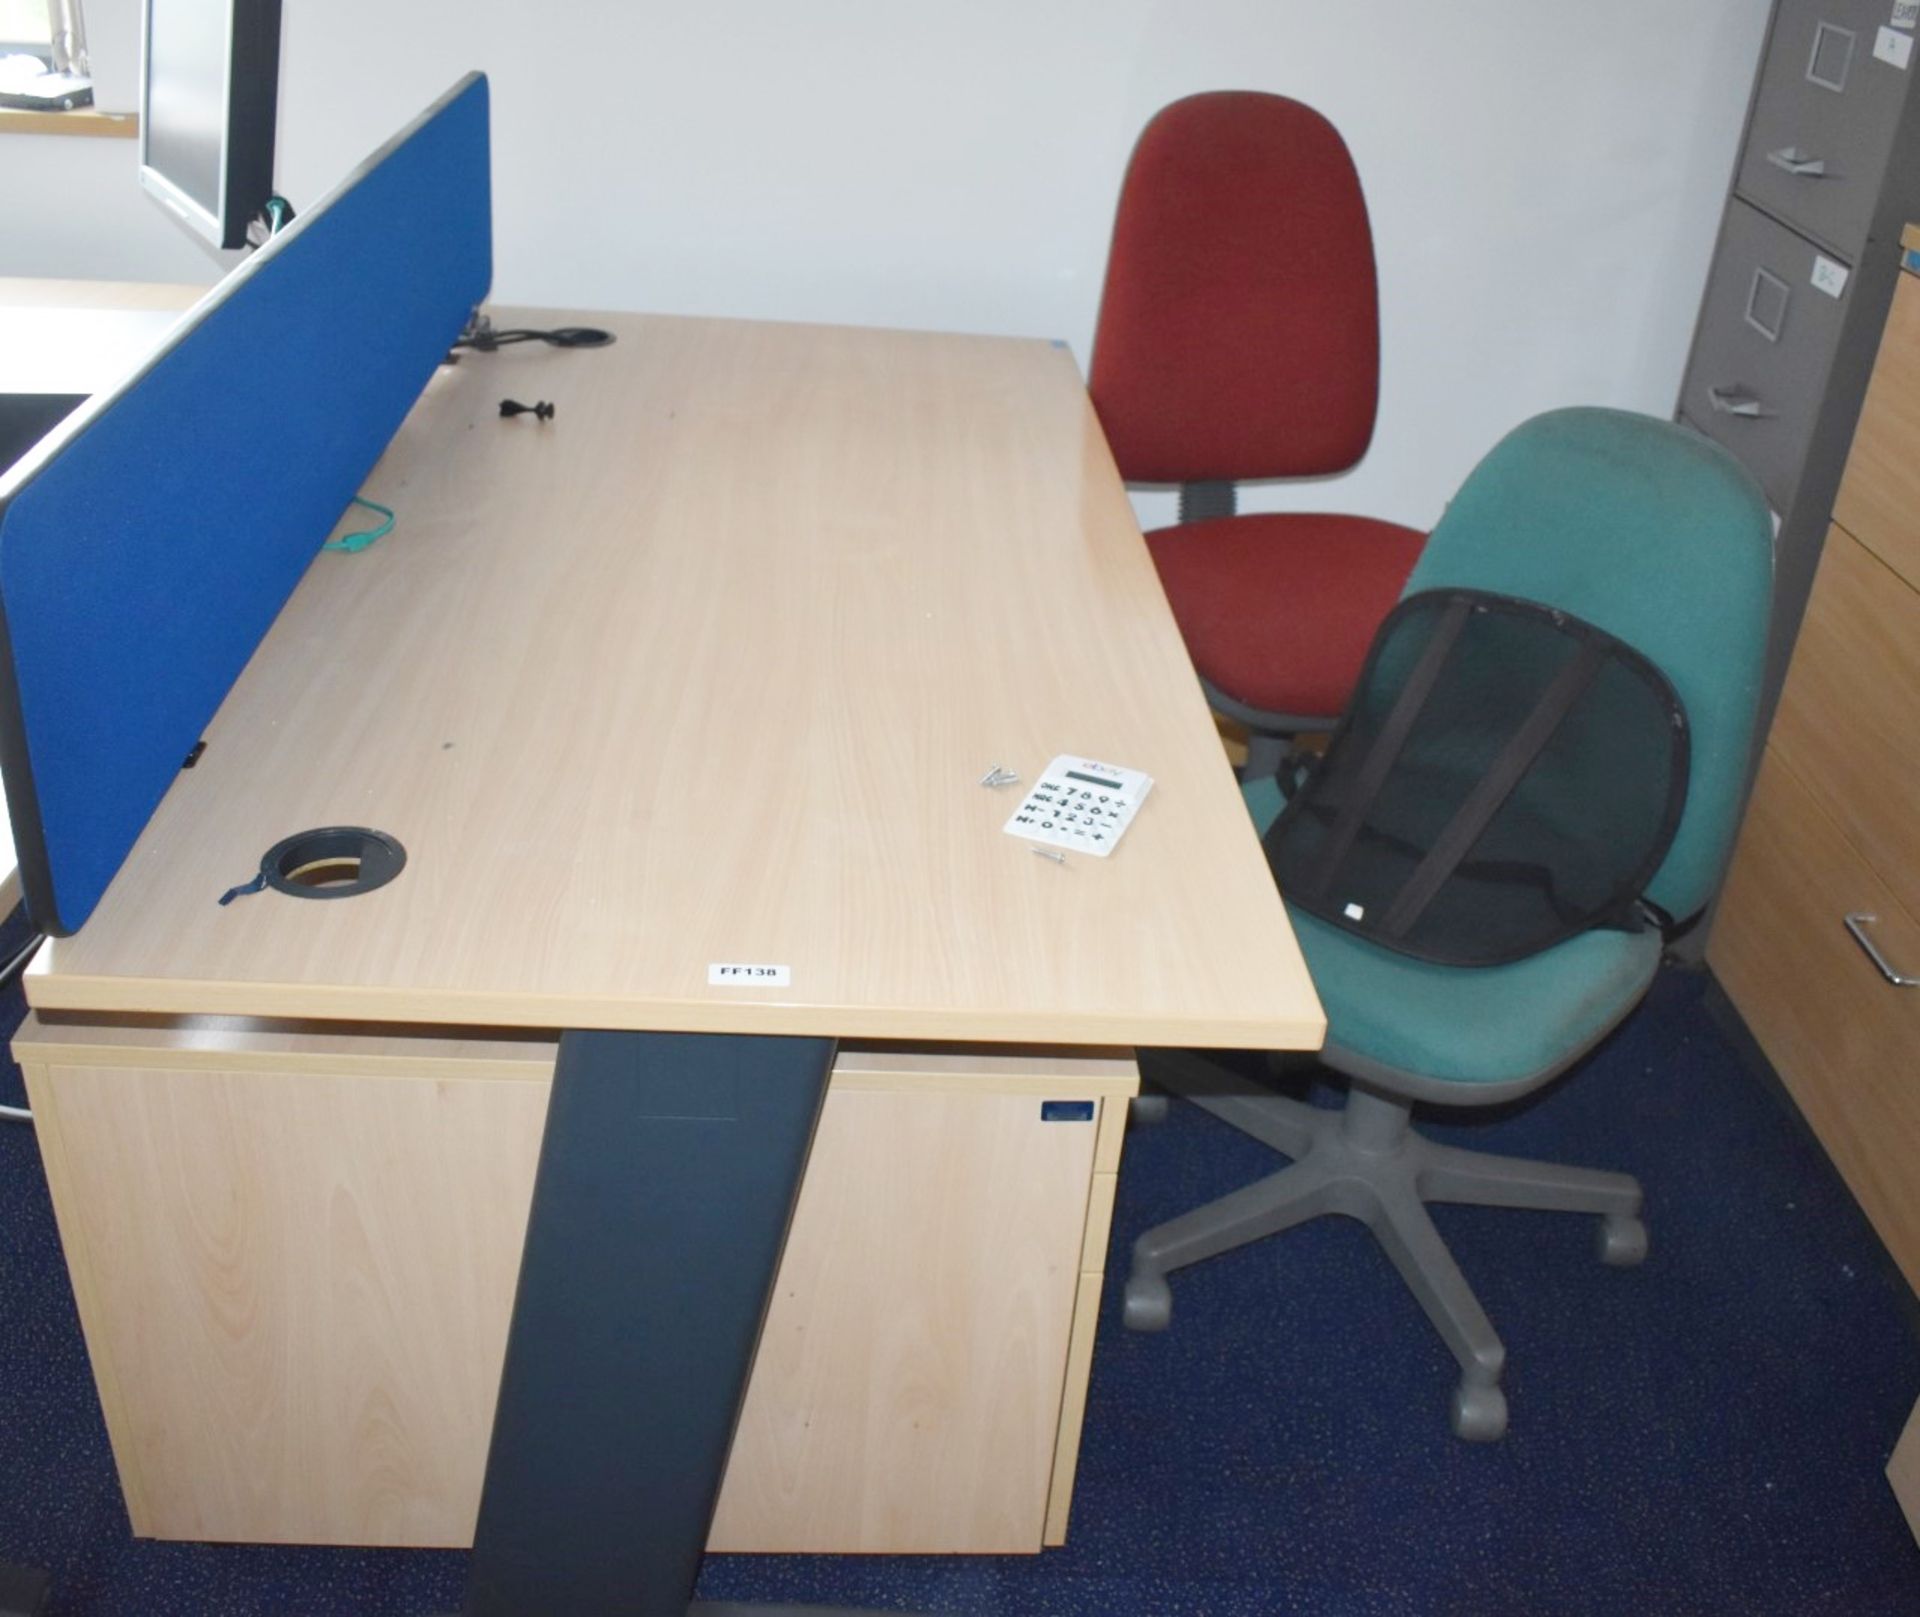 1 x Assorted Collection of Office Furniture - Includes 2 x 160cm Office Desks, 3 x Swivel Chairs, - Image 2 of 7